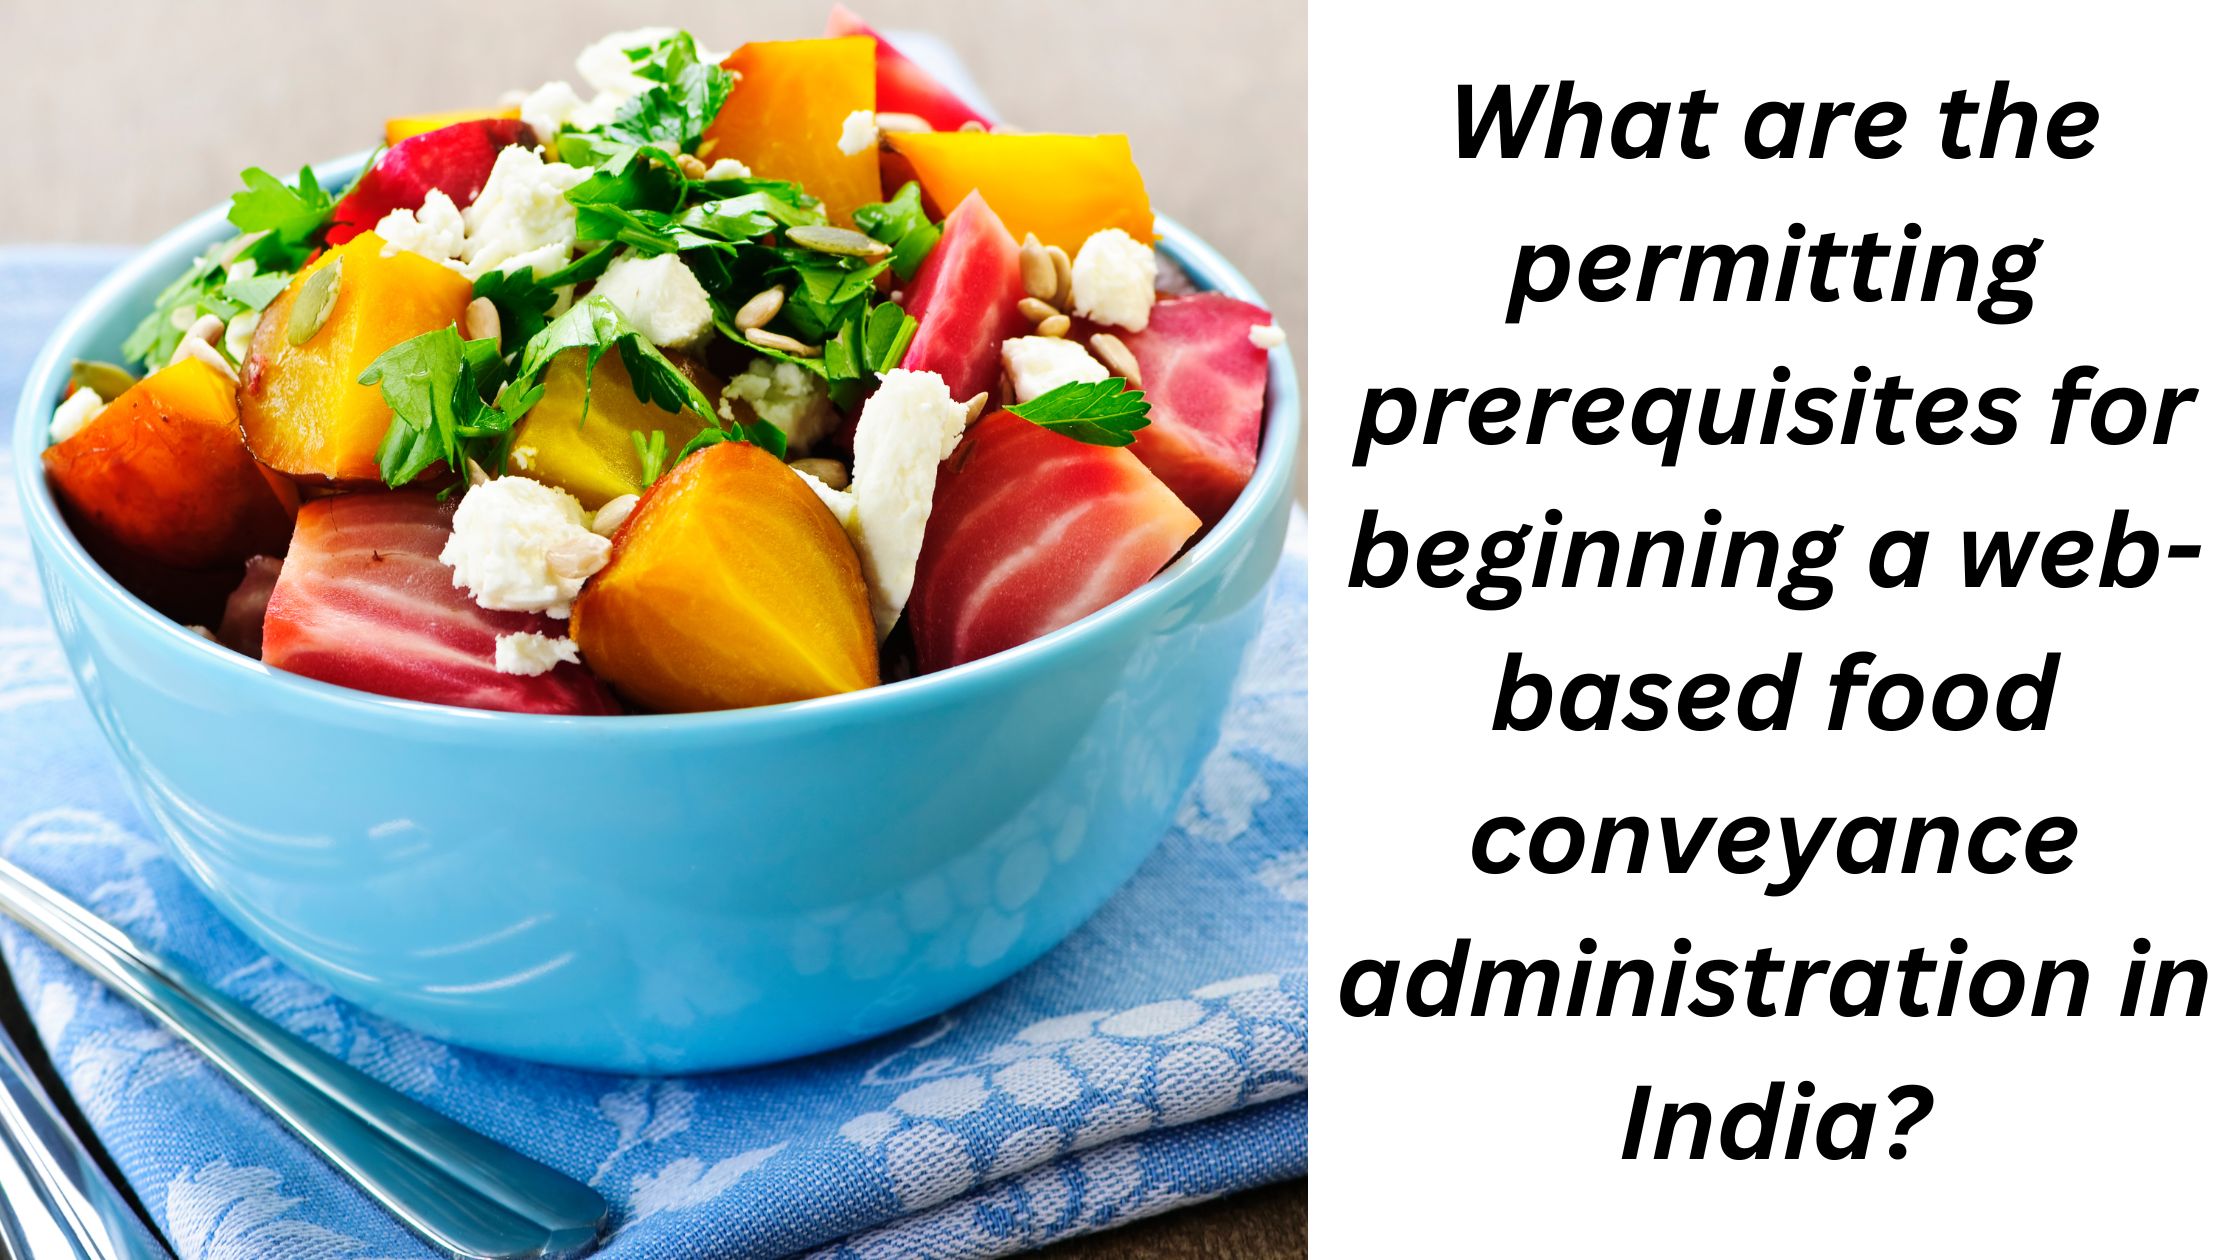 What are the permitting prerequisites for beginning a web-based food conveyance administration in India?